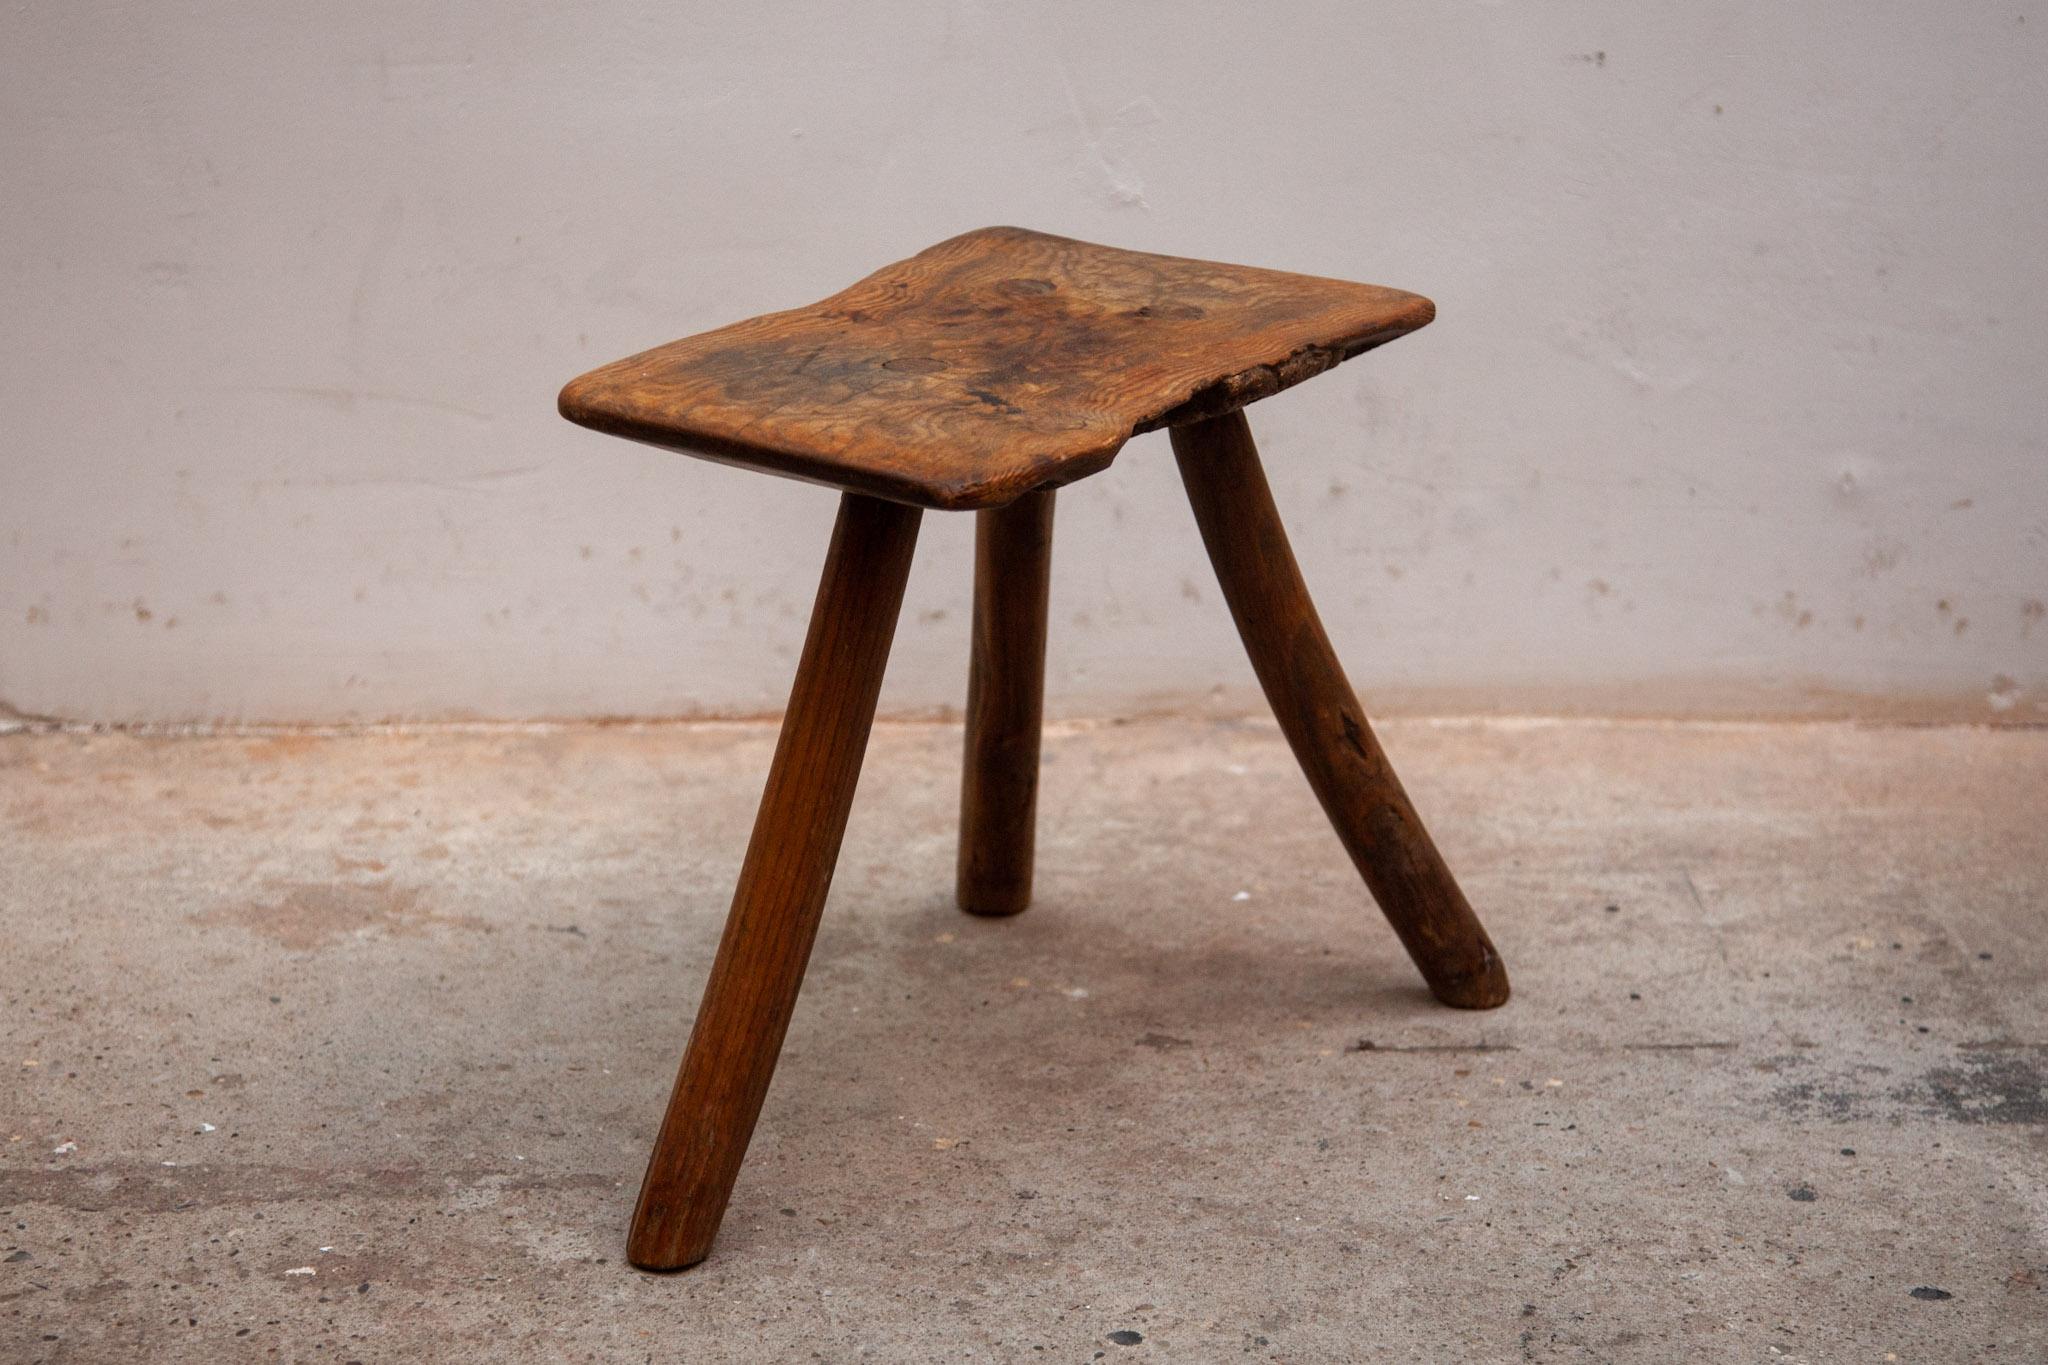 Hand-Crafted Brutalist Tripod Stool, France 1930s